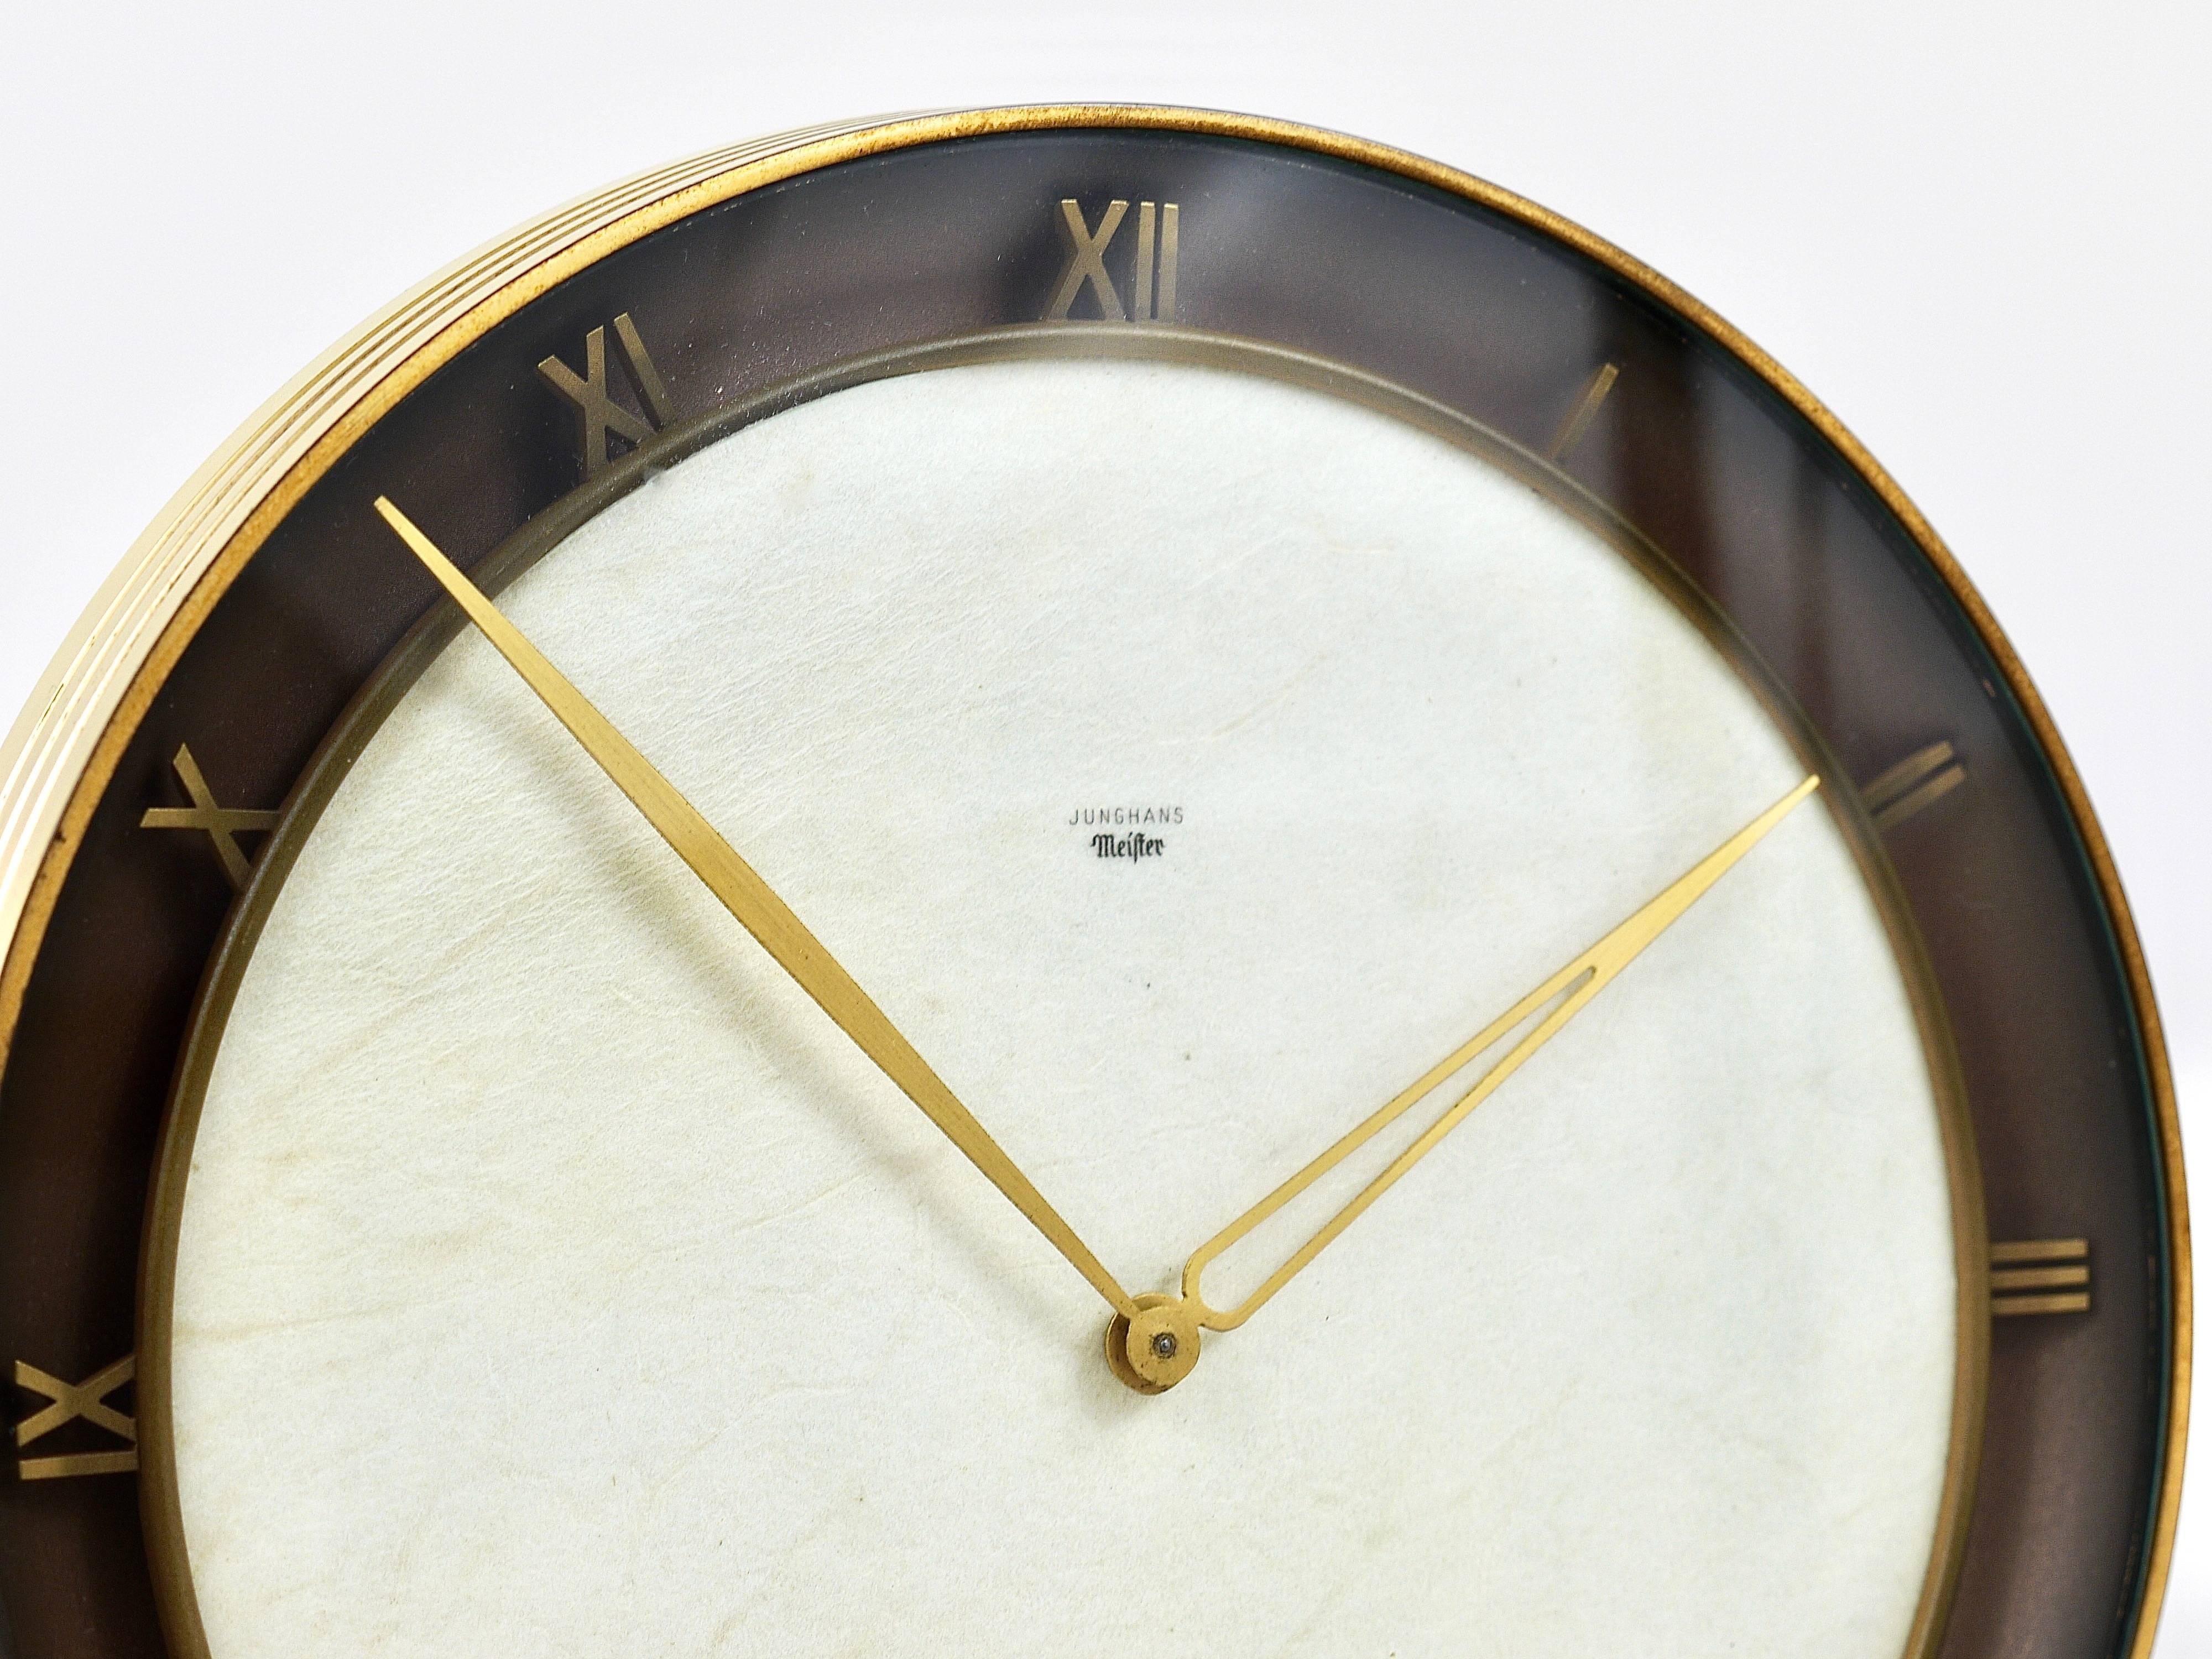 An elegant and solid Junghans Meister Art Deco desk or table clock with a mechanical 8-days movement from the 1930s. Executed by Junghans Germany. This clock has a nice brass base and housing, a clocks face made of parchment paper and beautiful